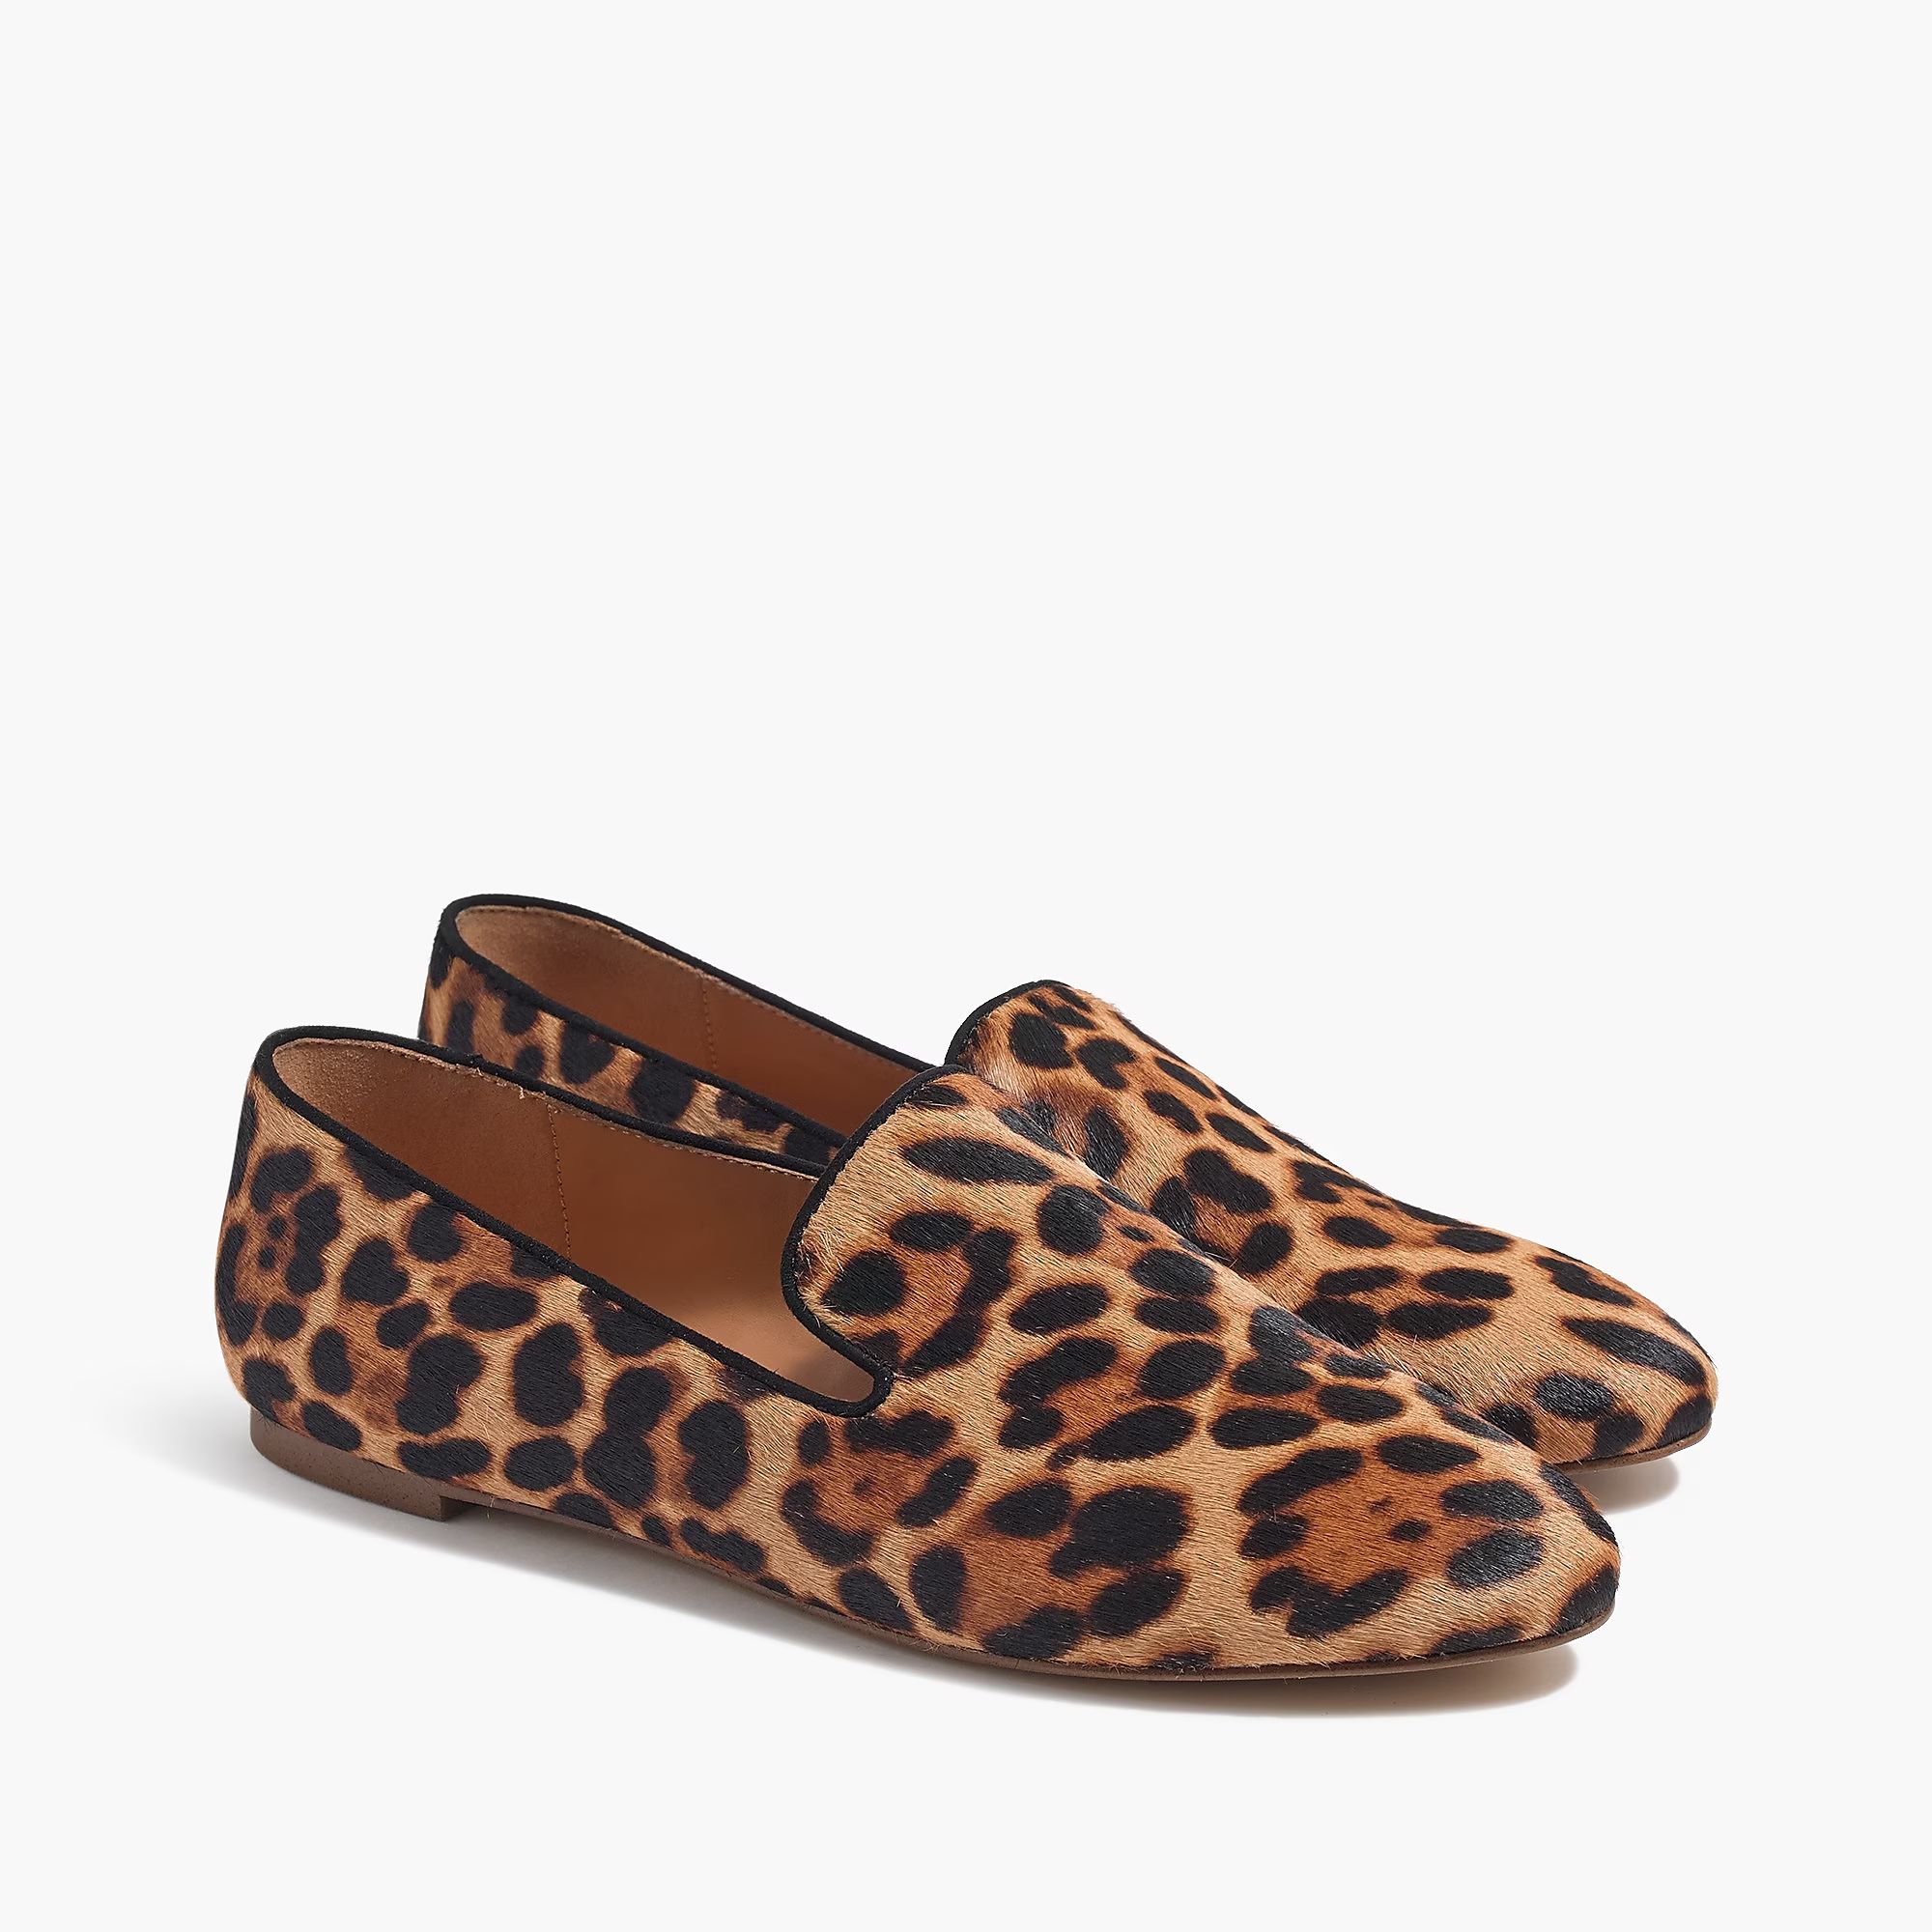 Leopard calf hair smoking loafers | J.Crew Factory